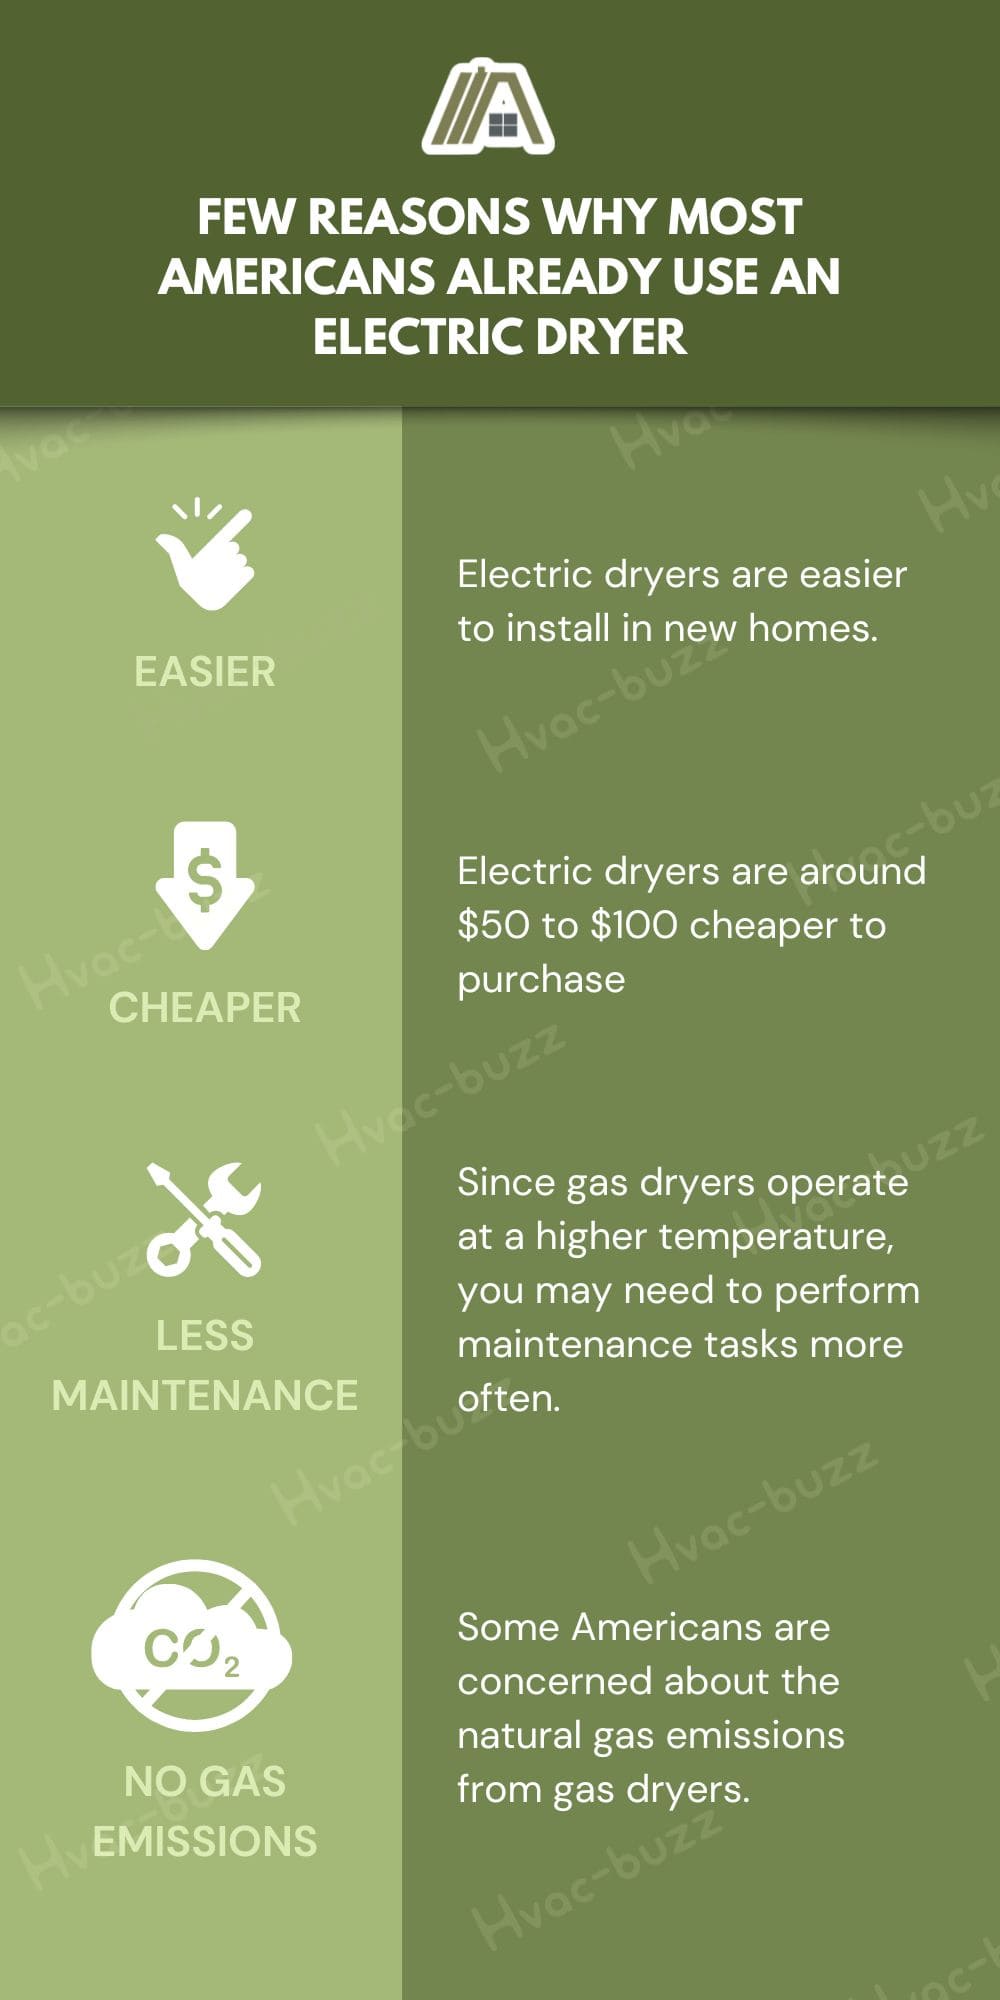 Few reasons why most Americans already use an electric dryer